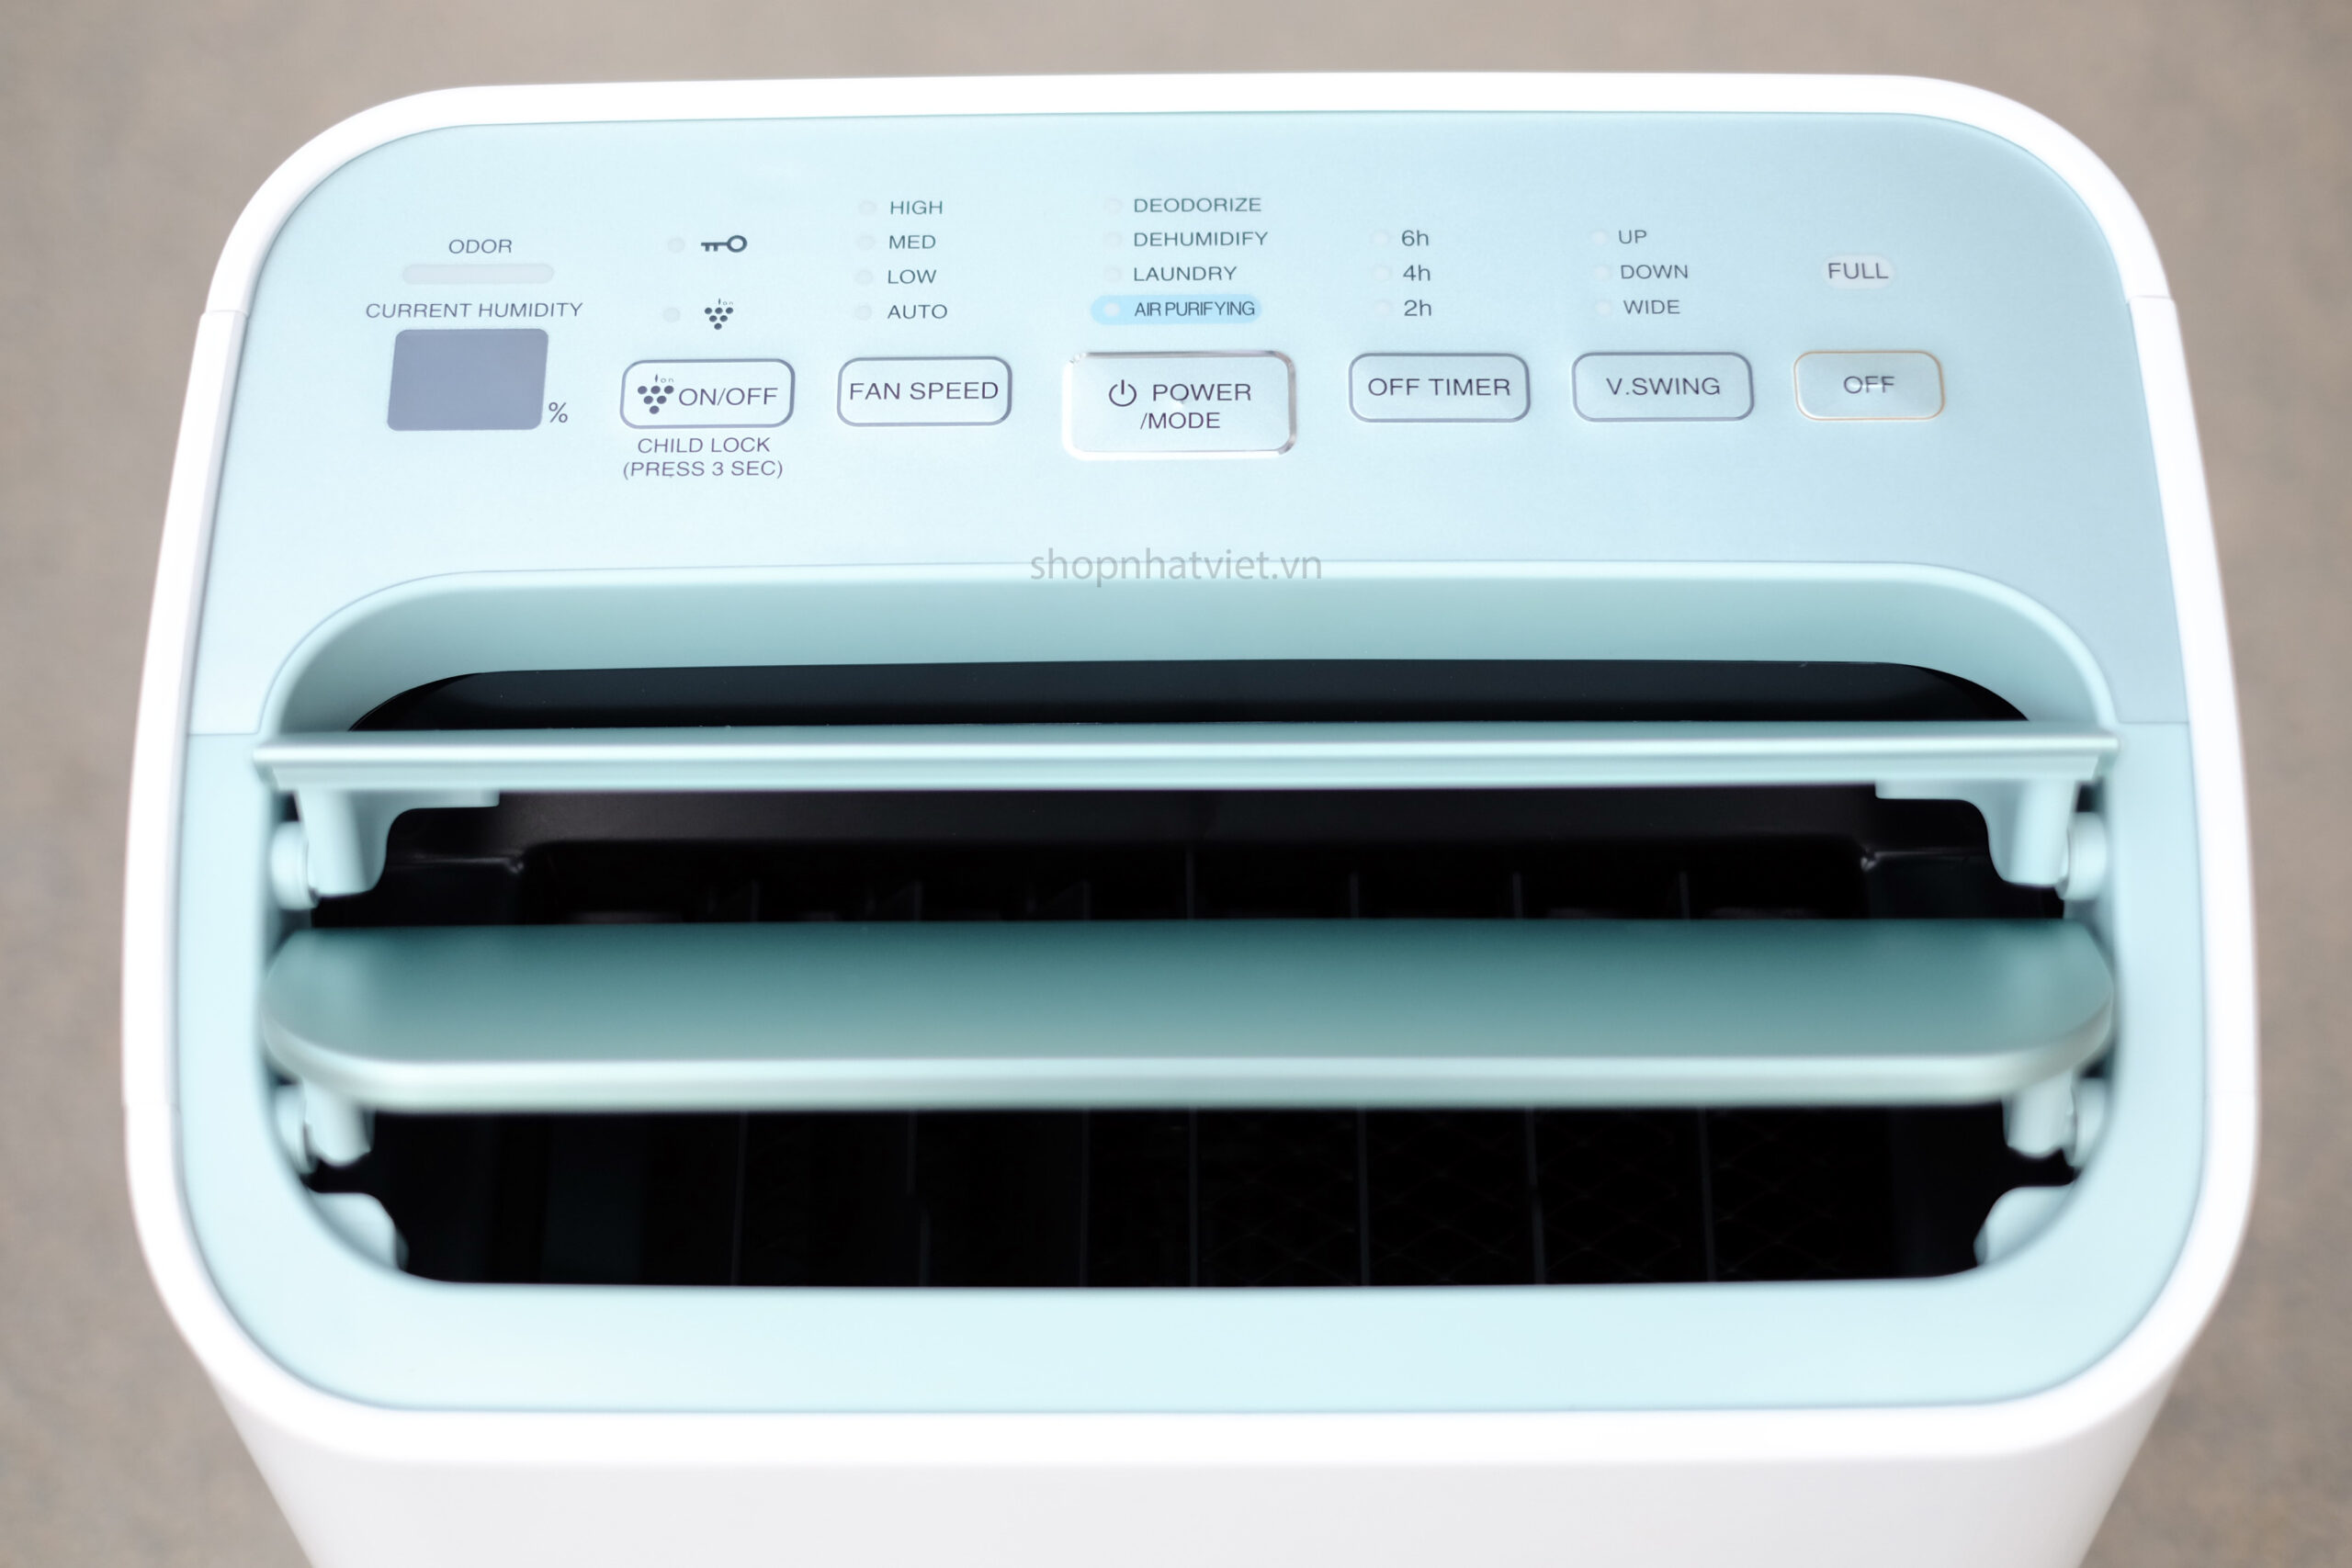 Sharp launches Air Purifier with Plasmacluster, Dehumidifying function